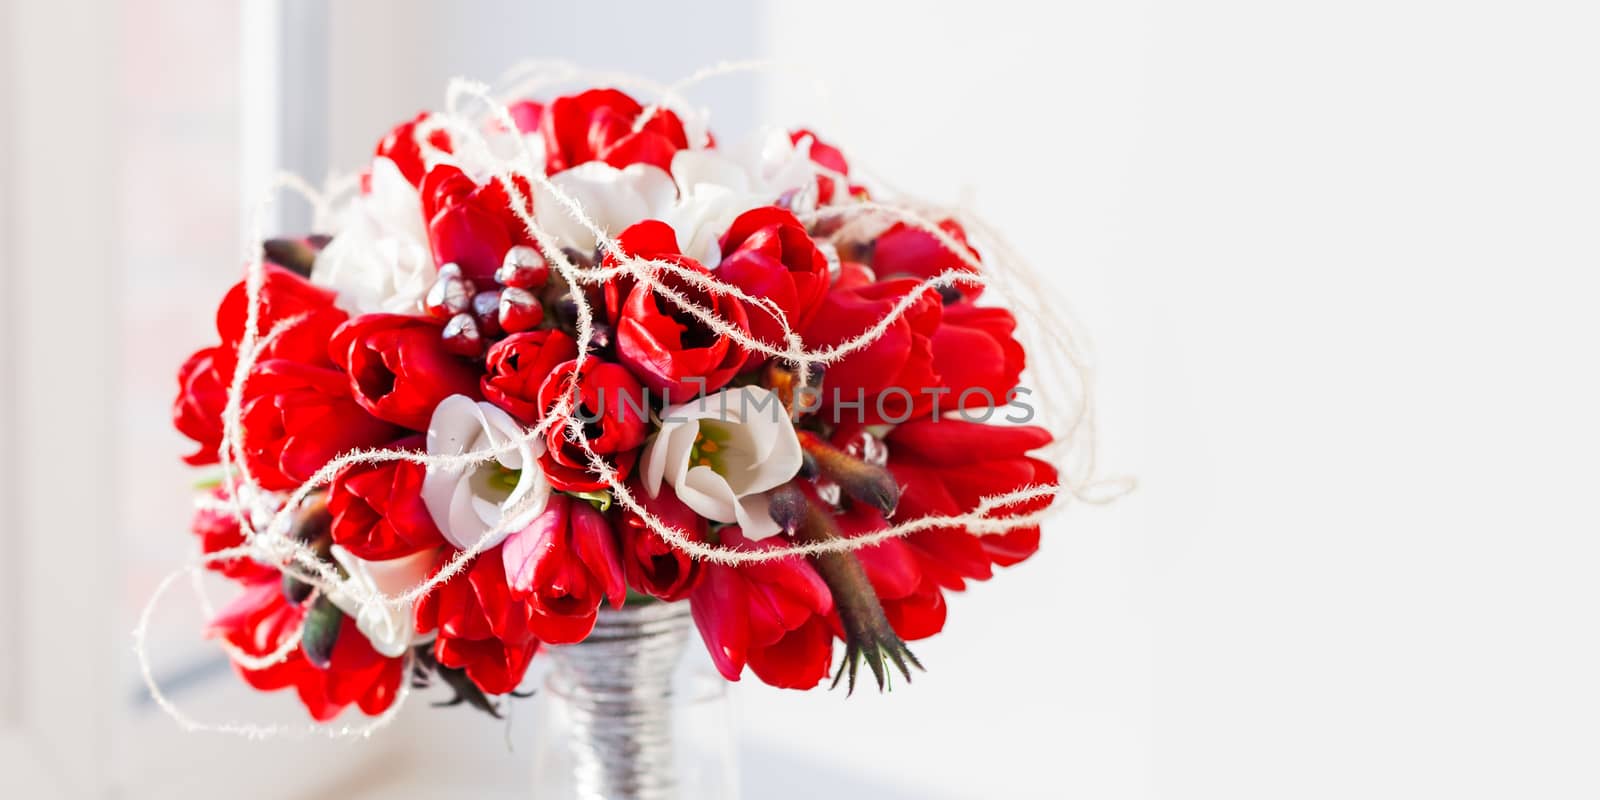 Bridal bouquet in glass vase on sunlight. Traditional floral composition with bright red tulips on window sill. Background with copy space. by aksenovko